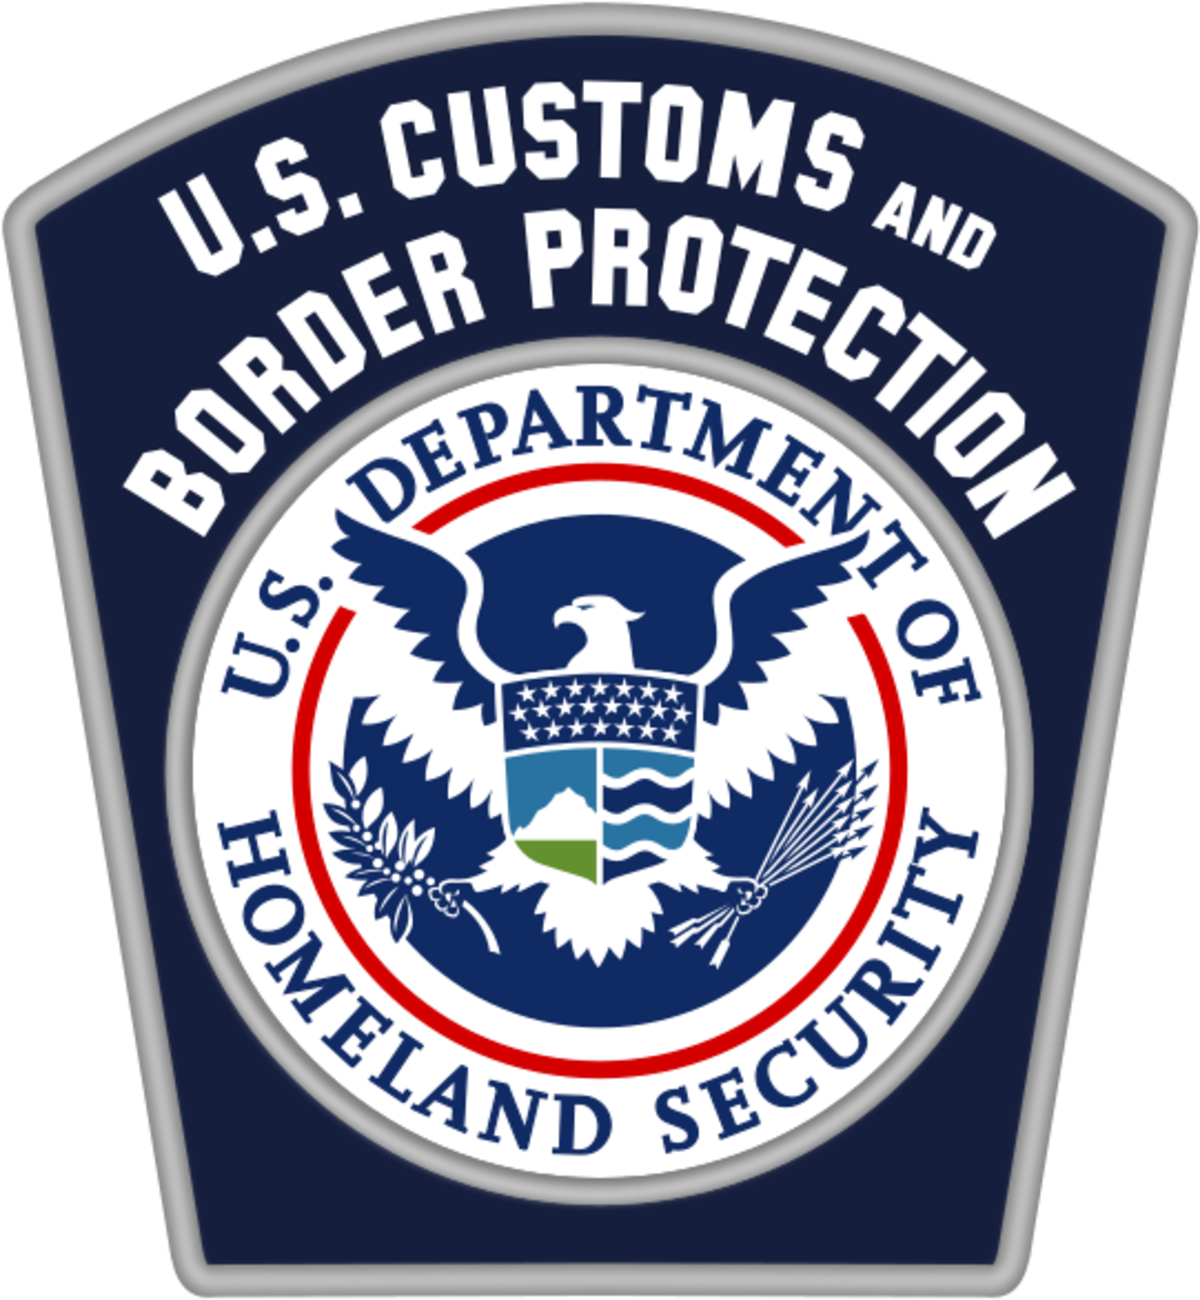 Download U.S. Customs and Border Protection/Commissioner - Wikispooks